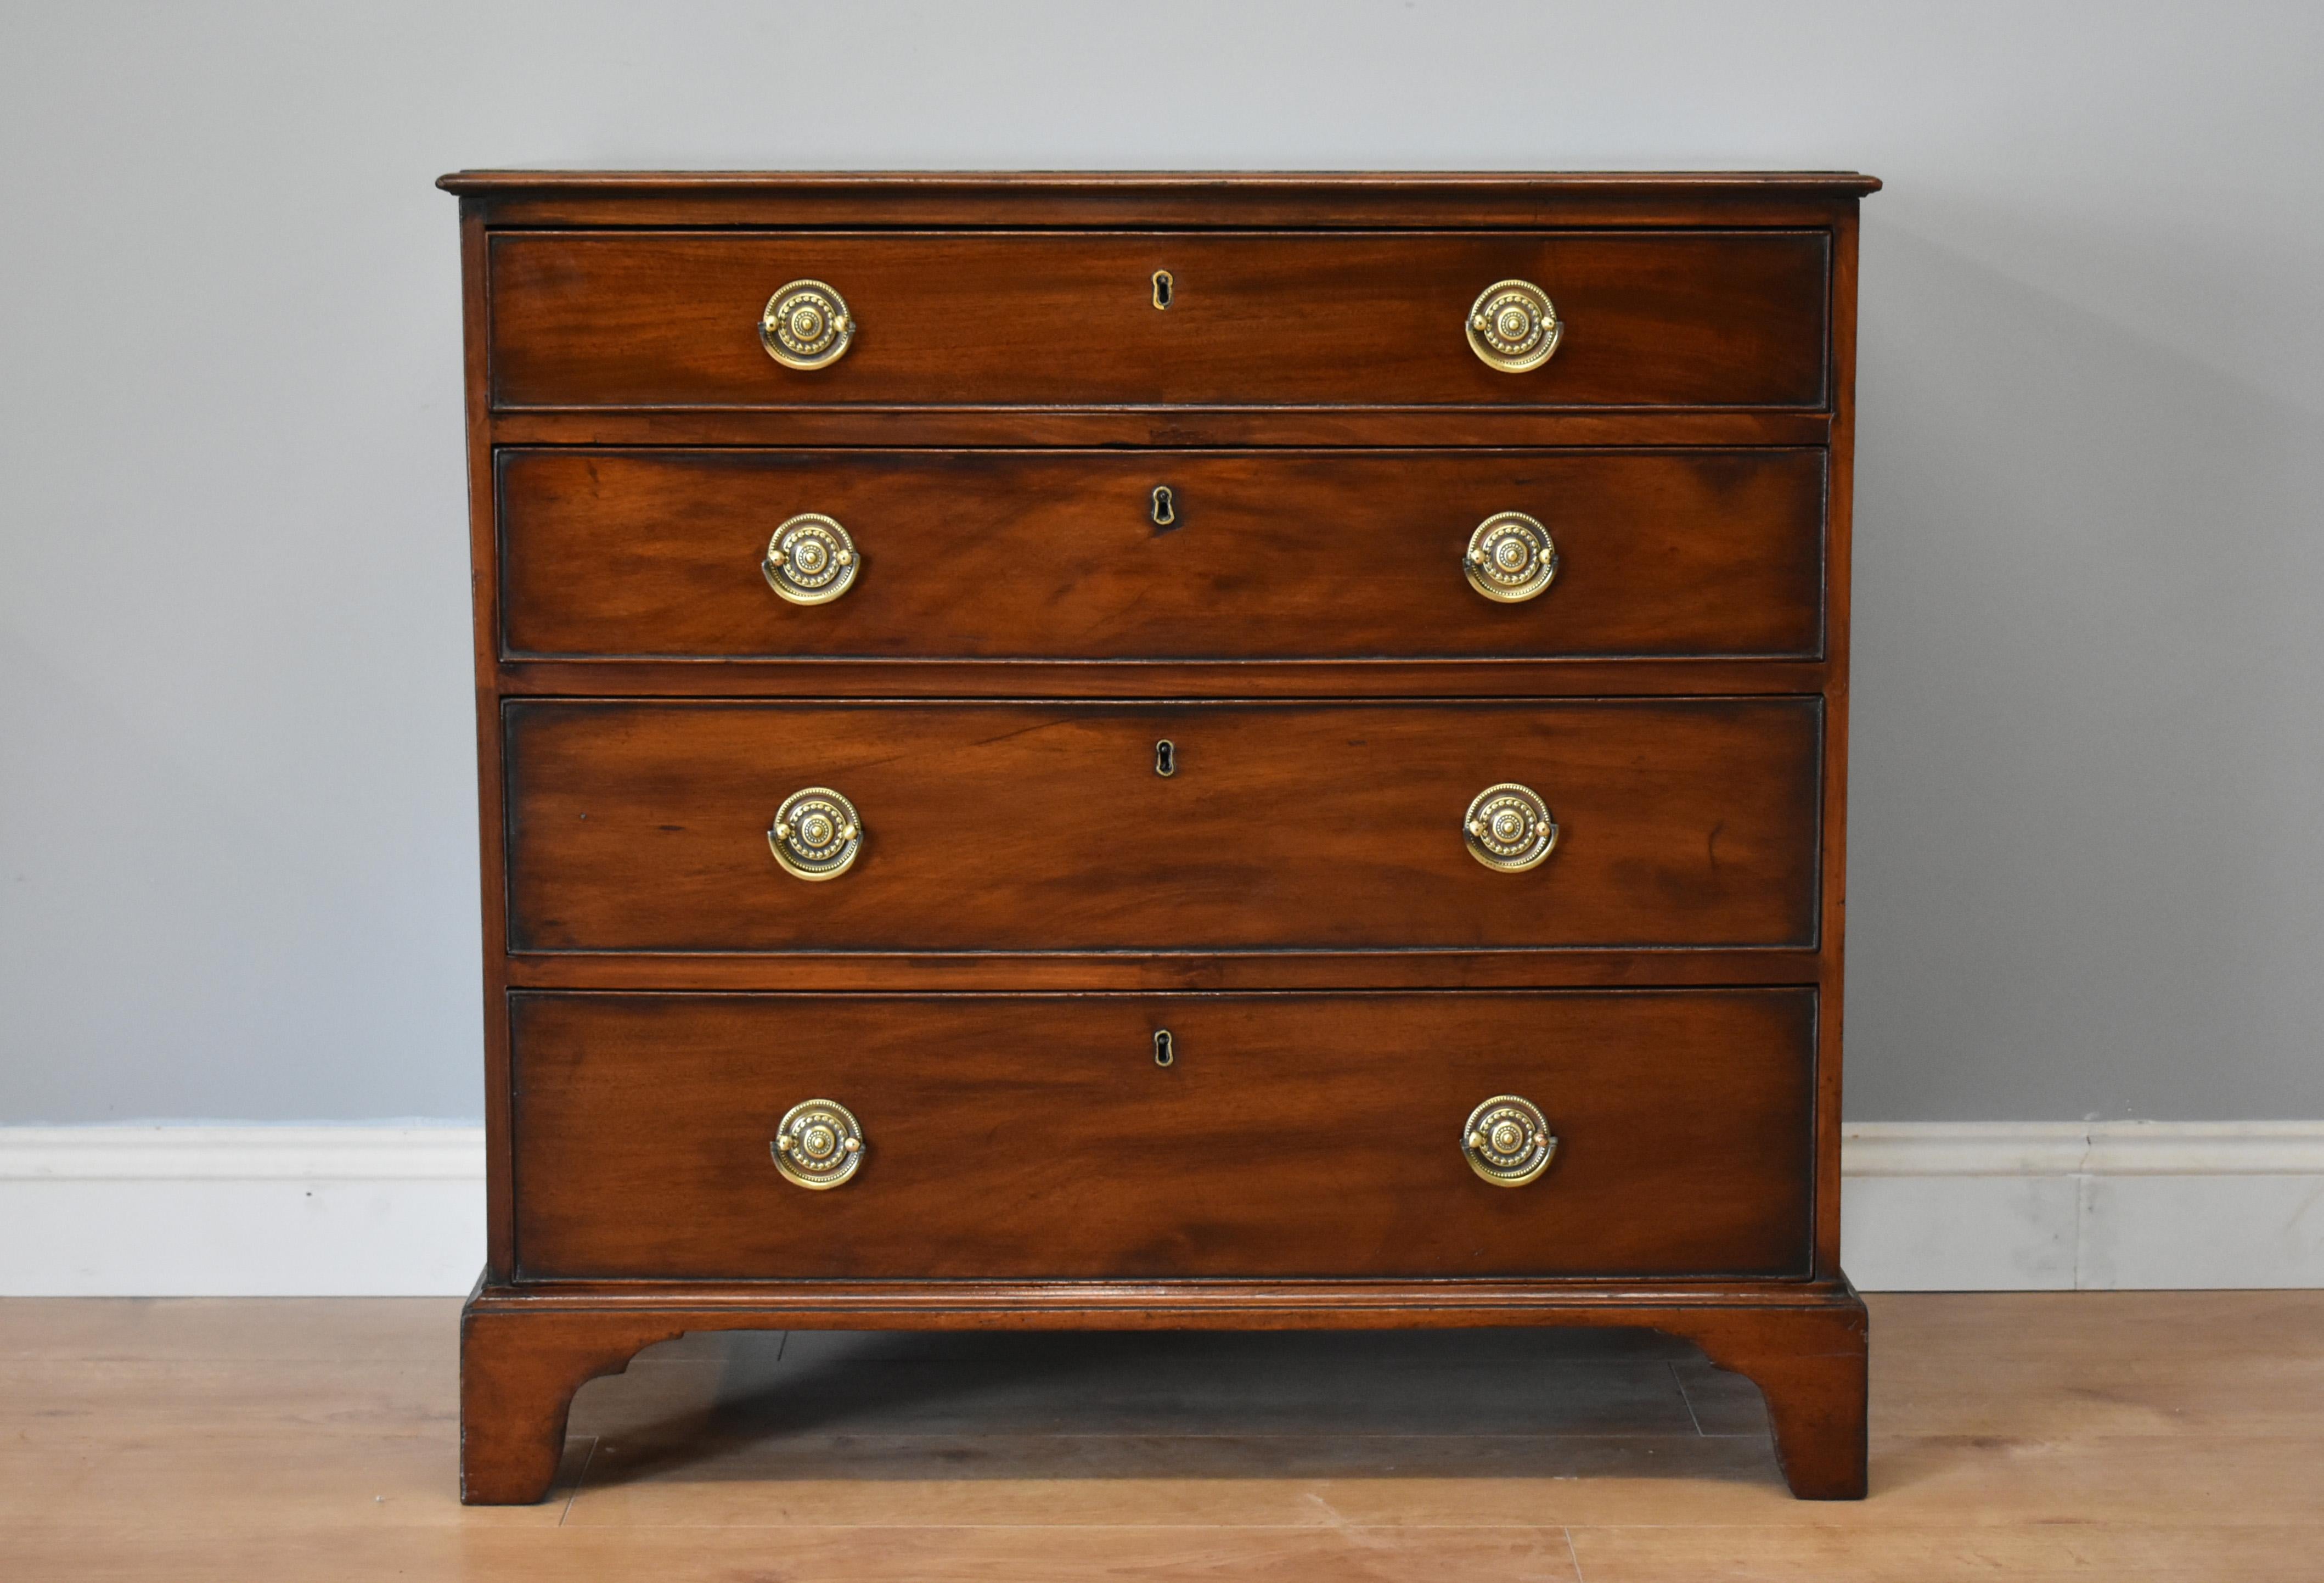 For sale is a good quality George III mahogany chest of drawers. Having four graduated drawers, each with brass ring handles, standing on bracket feet. The chest is in excellent condition.

Measures: Width 34